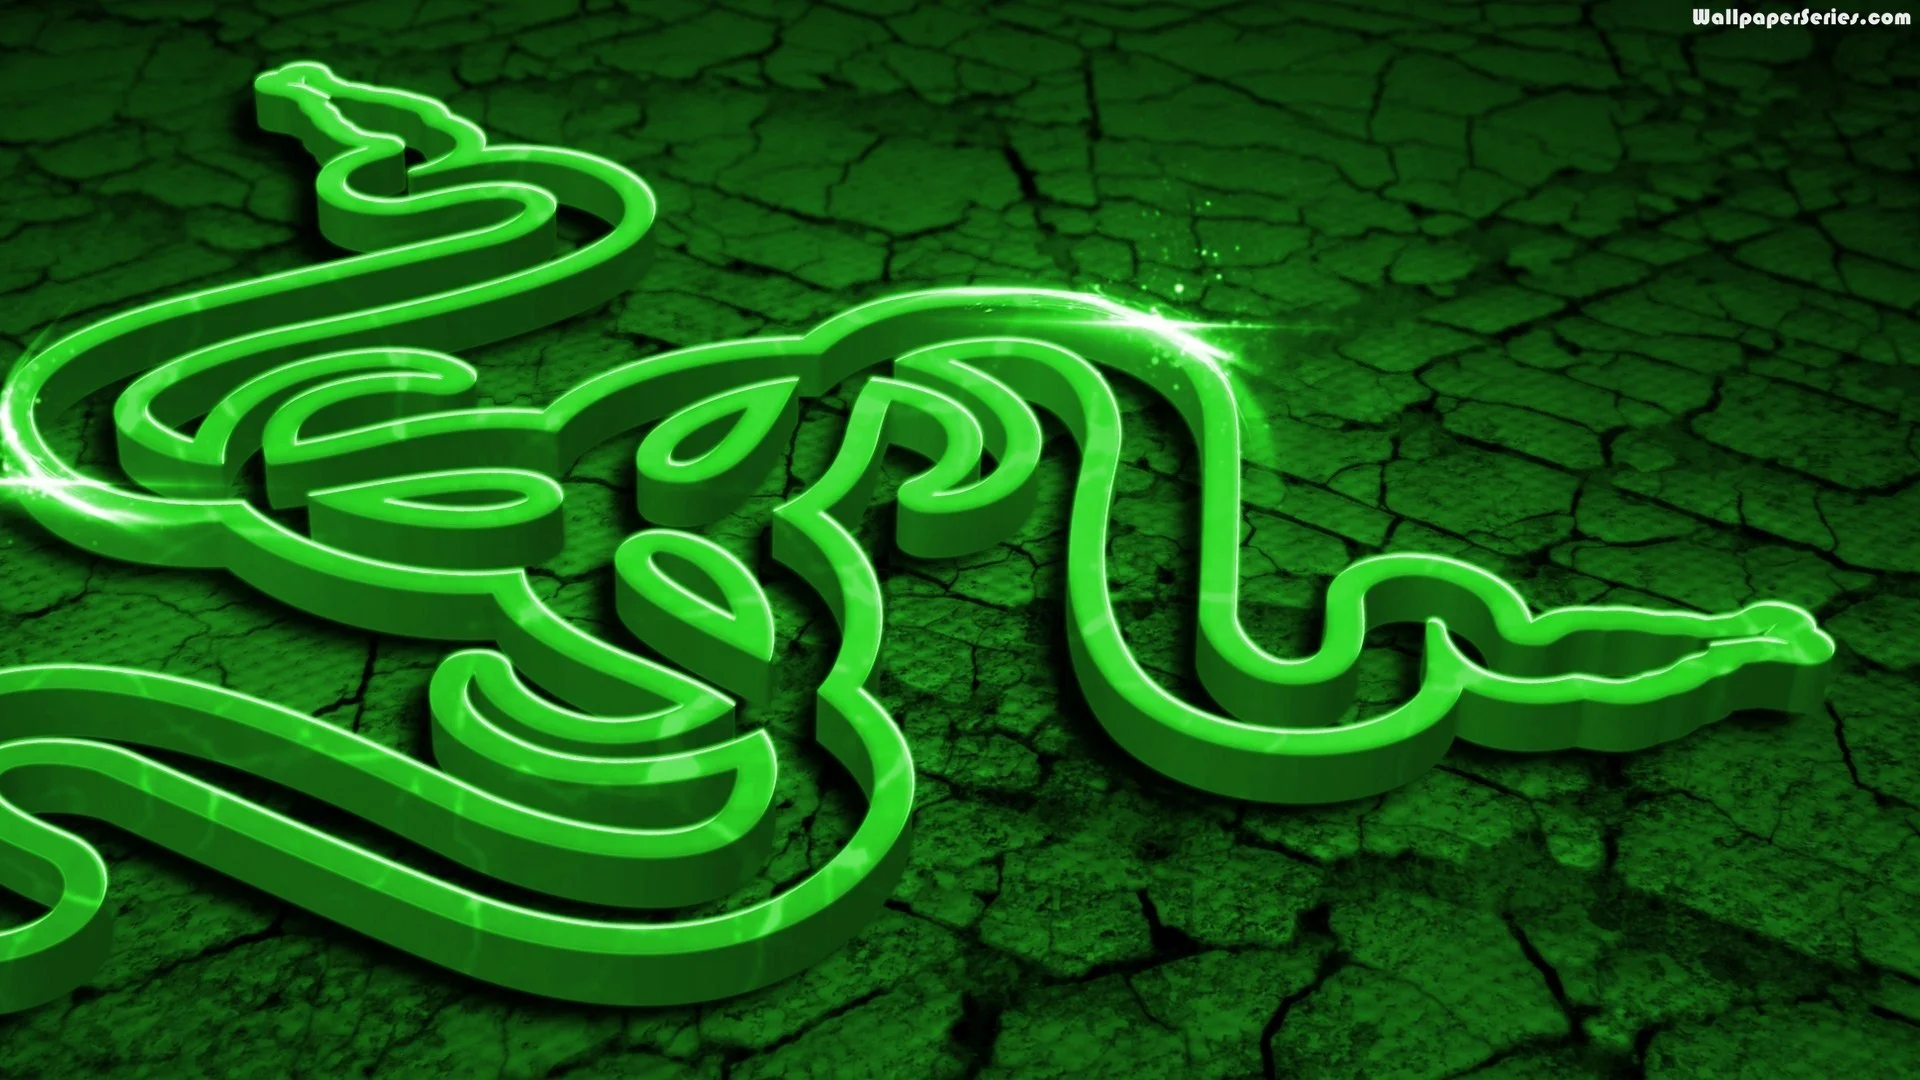 397566 wallpaper razer logo abstract background 4k hd  Rare Gallery  HD Wallpapers